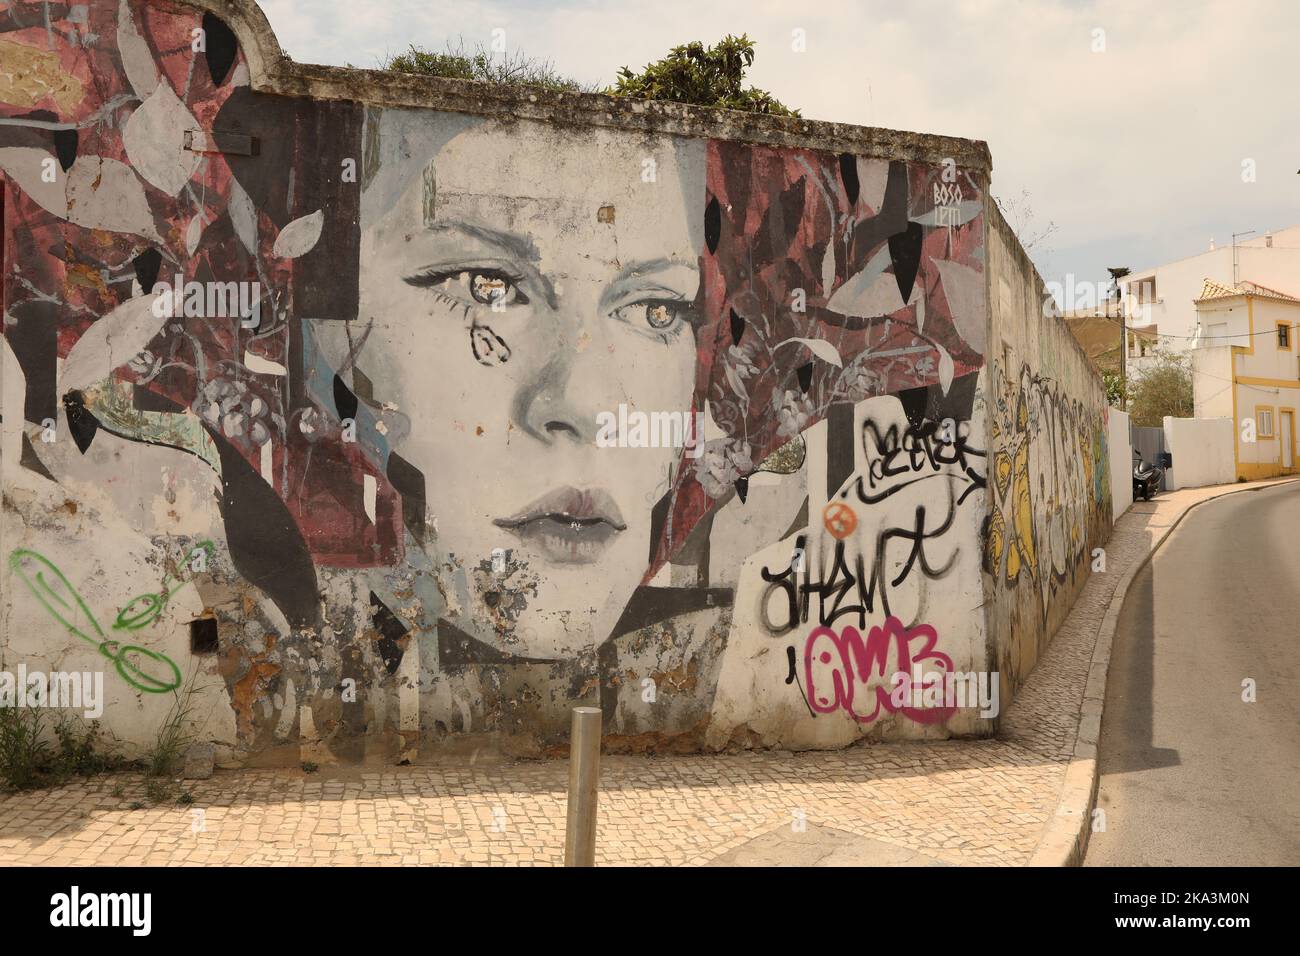 A mural of a woman on a wall, Lagos, Portugal Stock Photo